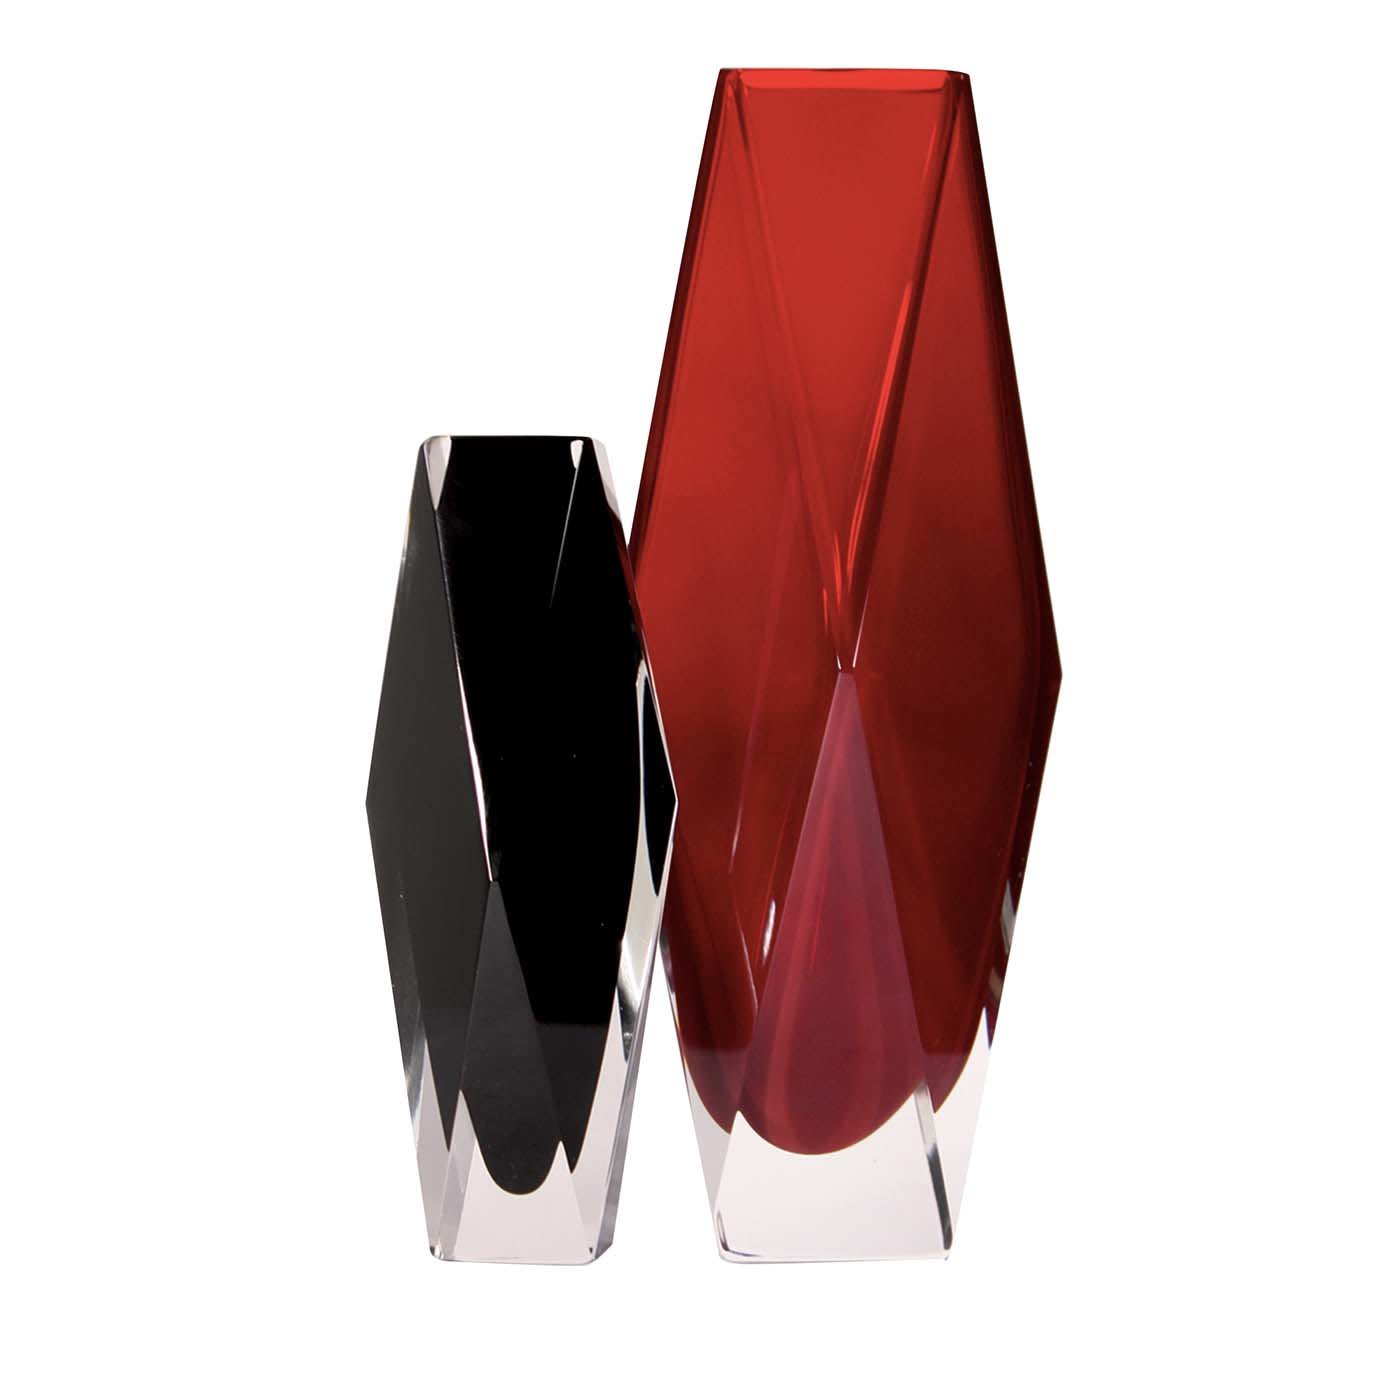 Gotham Set of Two Black and Red Vases - Fornace Mian